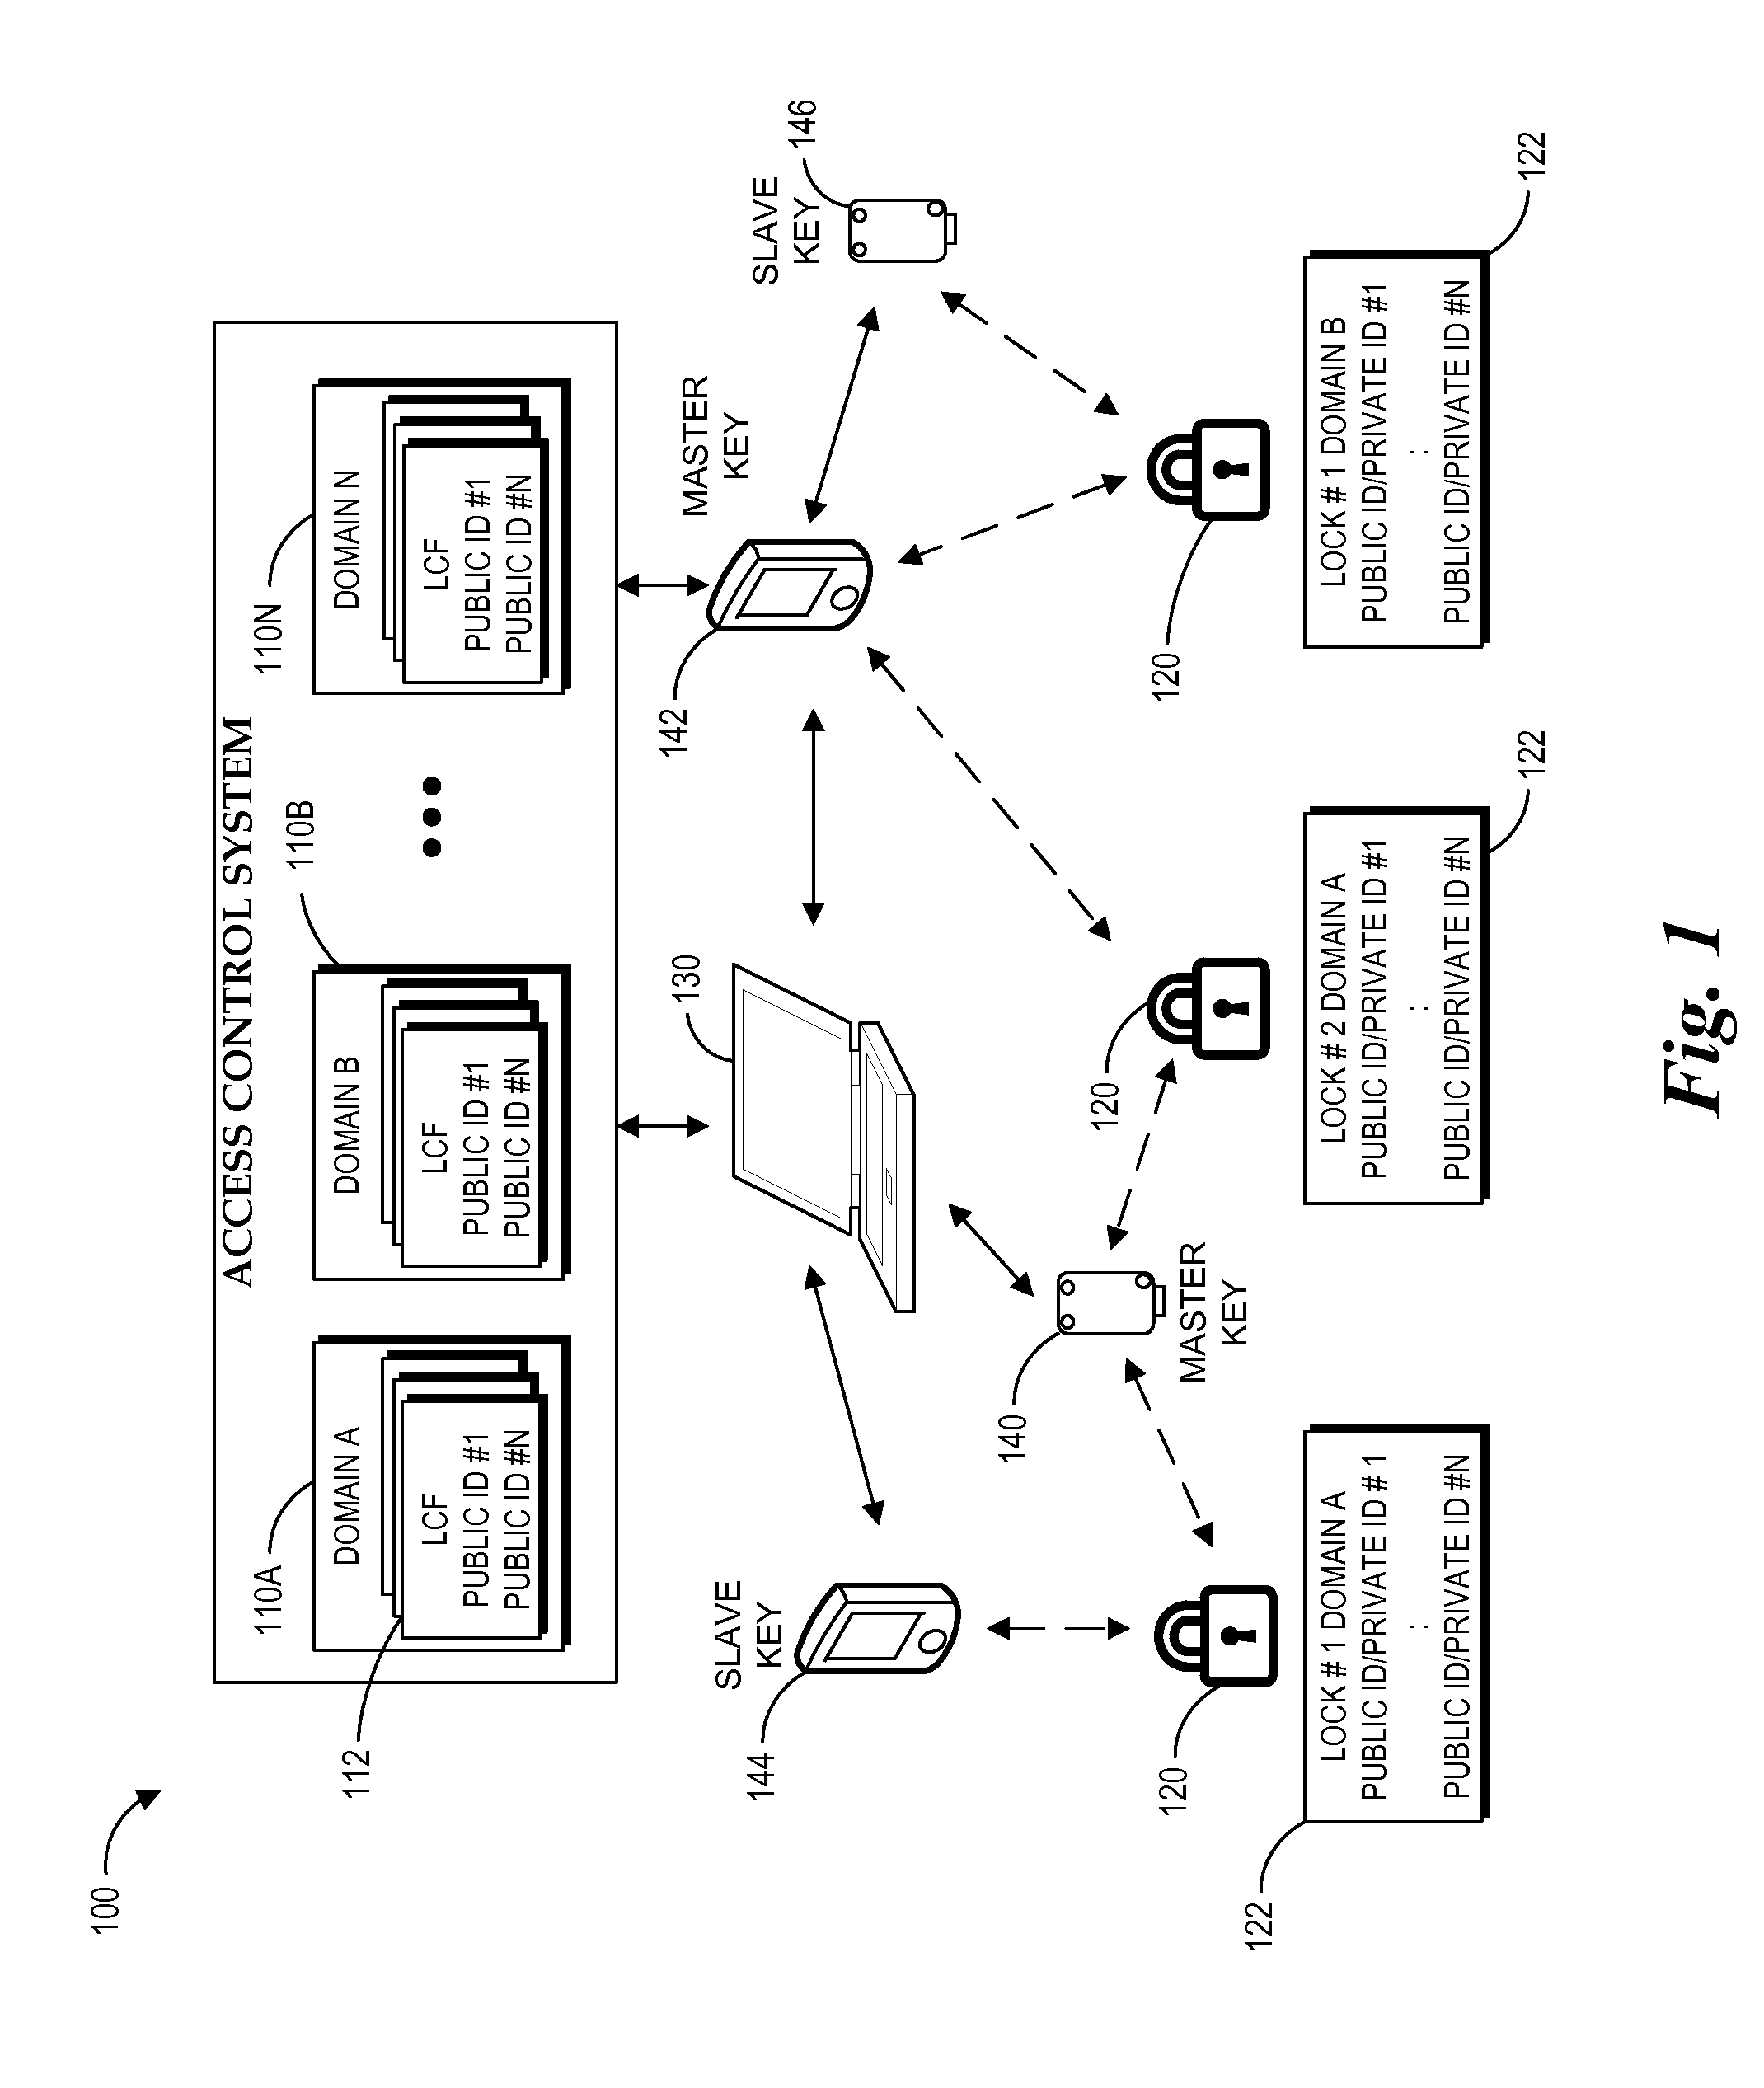 Contactless electronic access control system